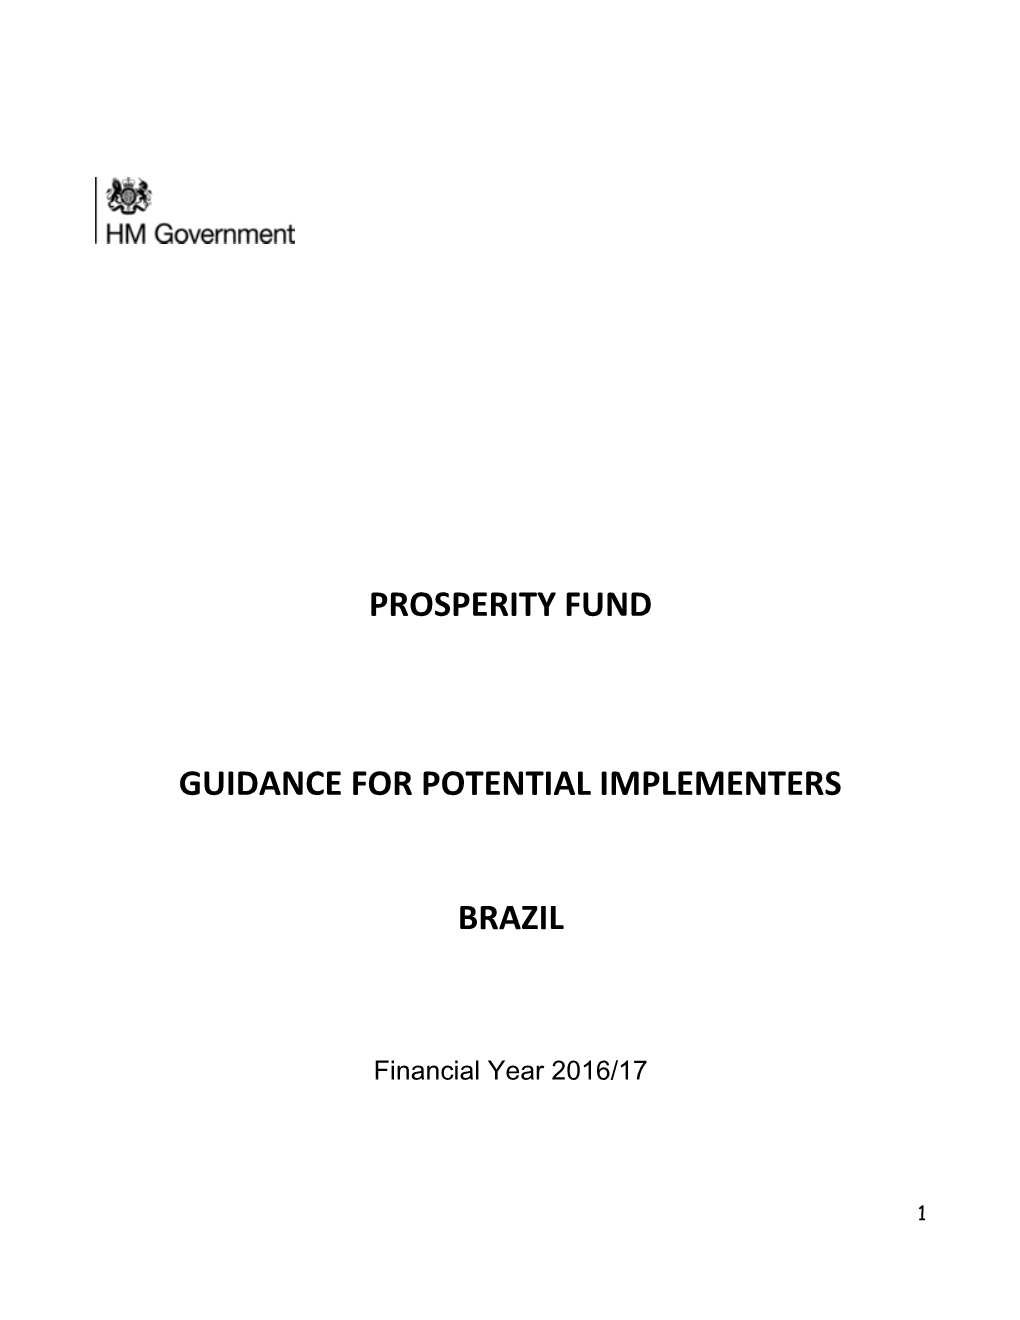 Prosperity Fund Central Programmes 15 16 Bidding Guidance for Potential Implementers